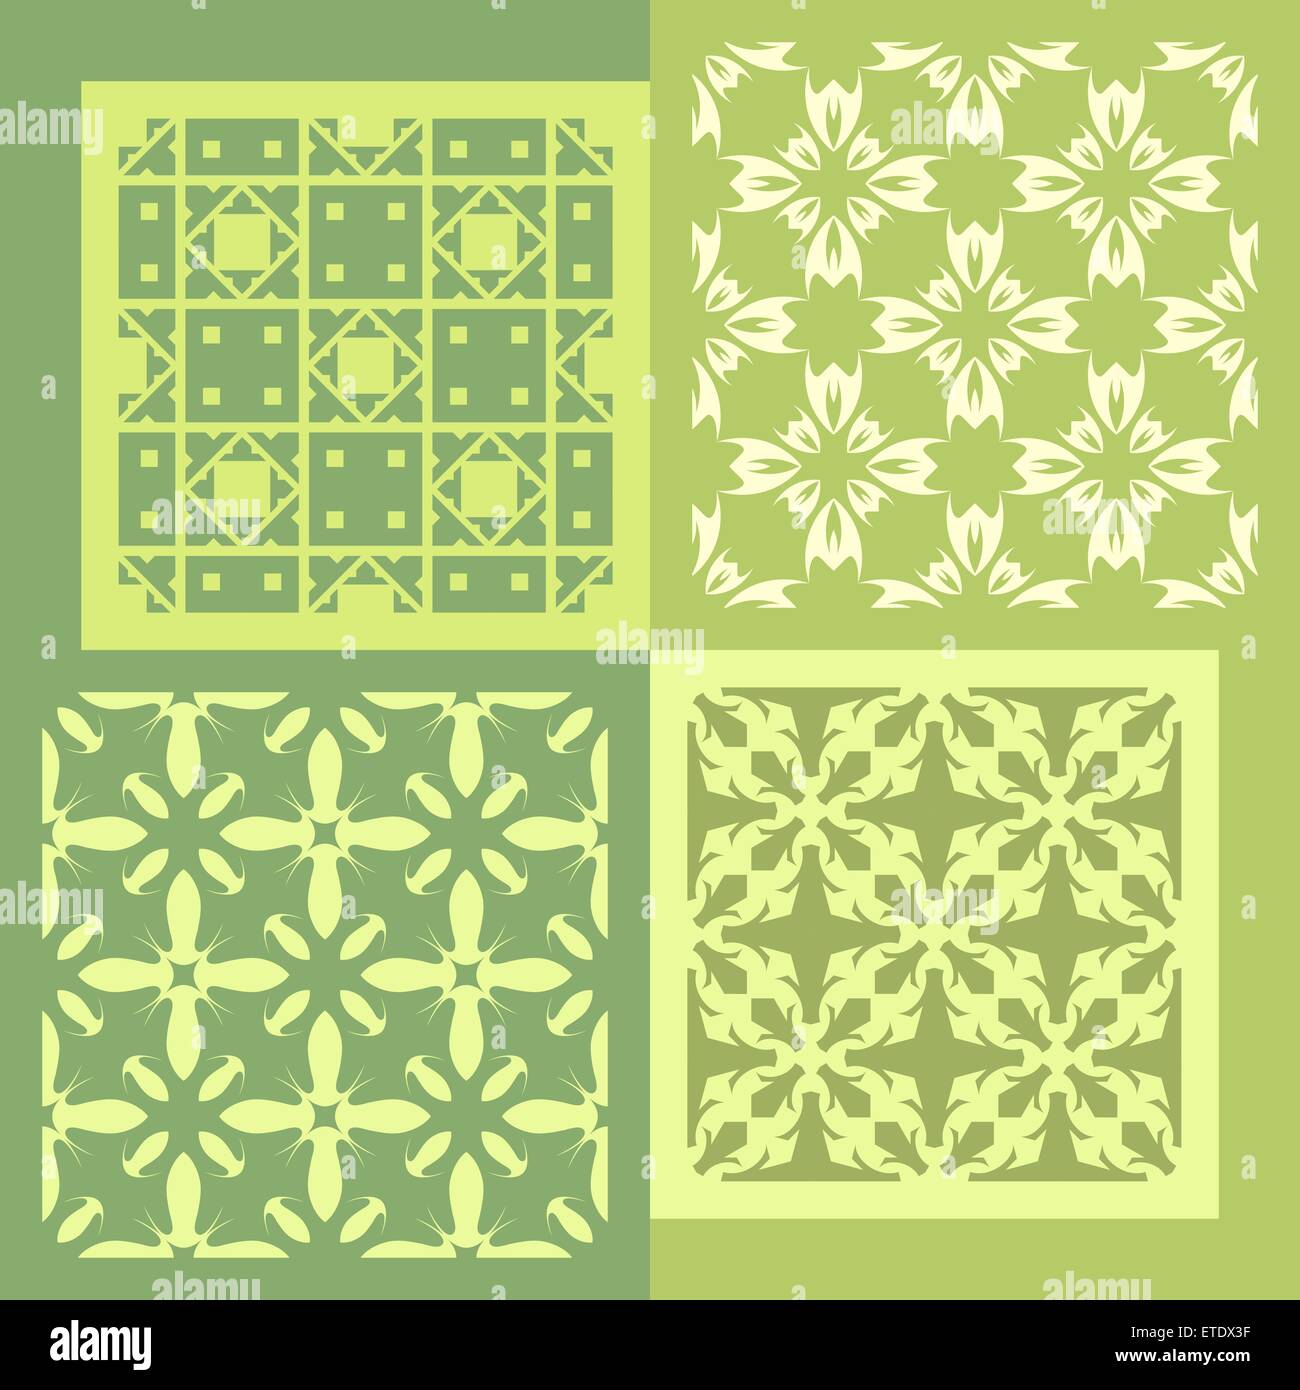 Set of four seamless patterns. Vintage geometric ornaments. Can be used for wallpaper, pattern fills, web page background. Stock Vector